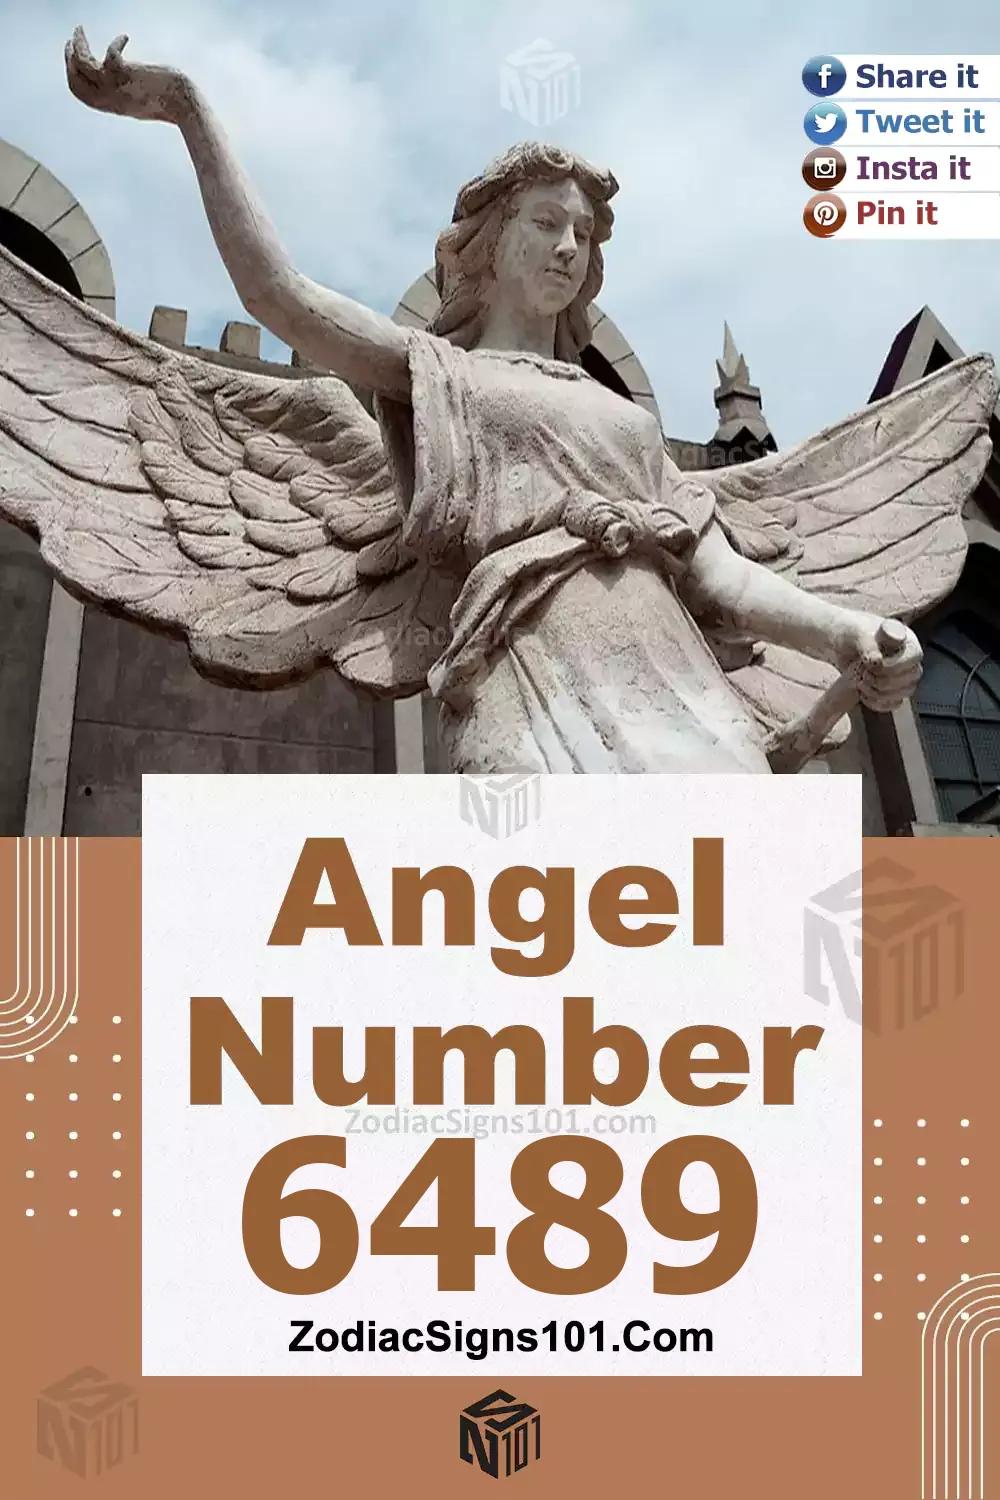 6489 Angel Number Meaning